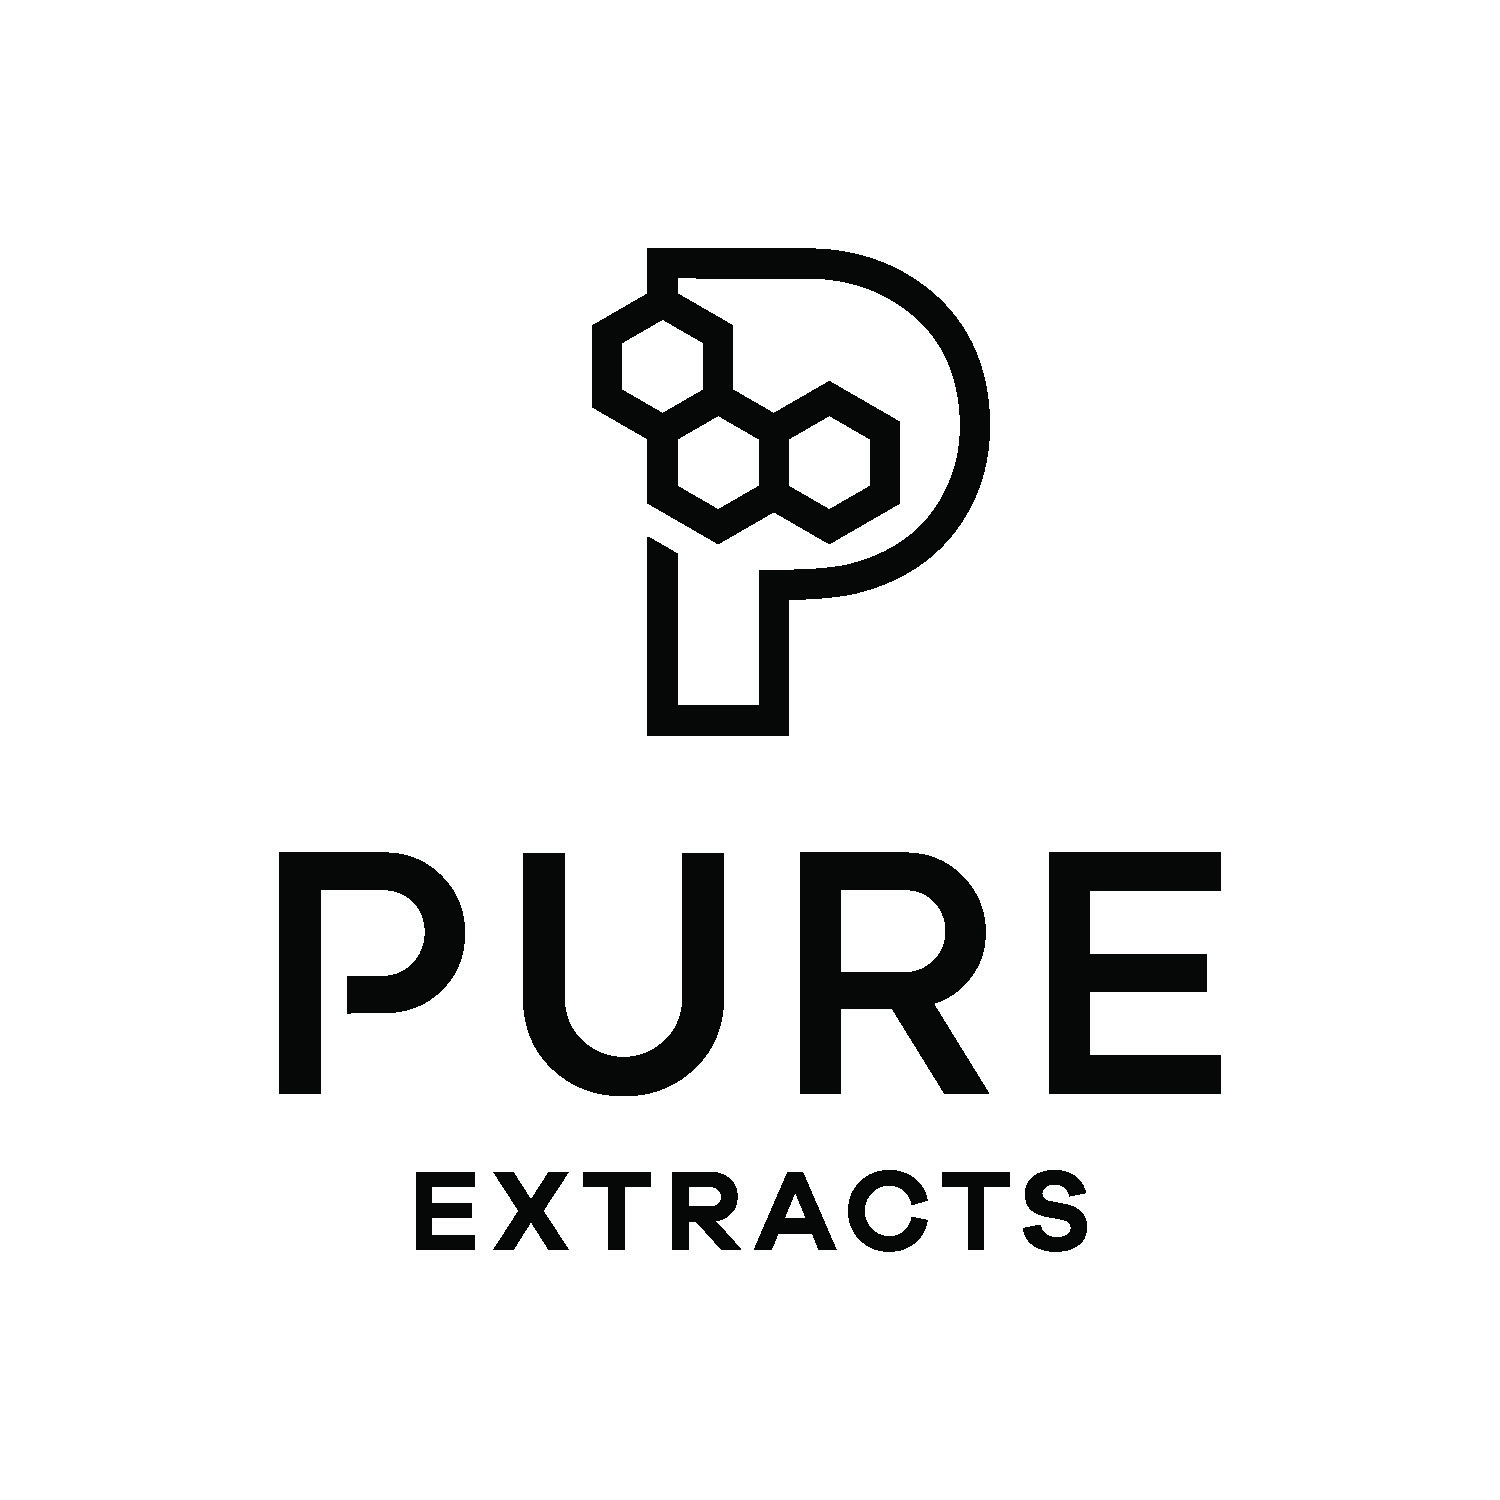 Pure Extracts Logo.jpg